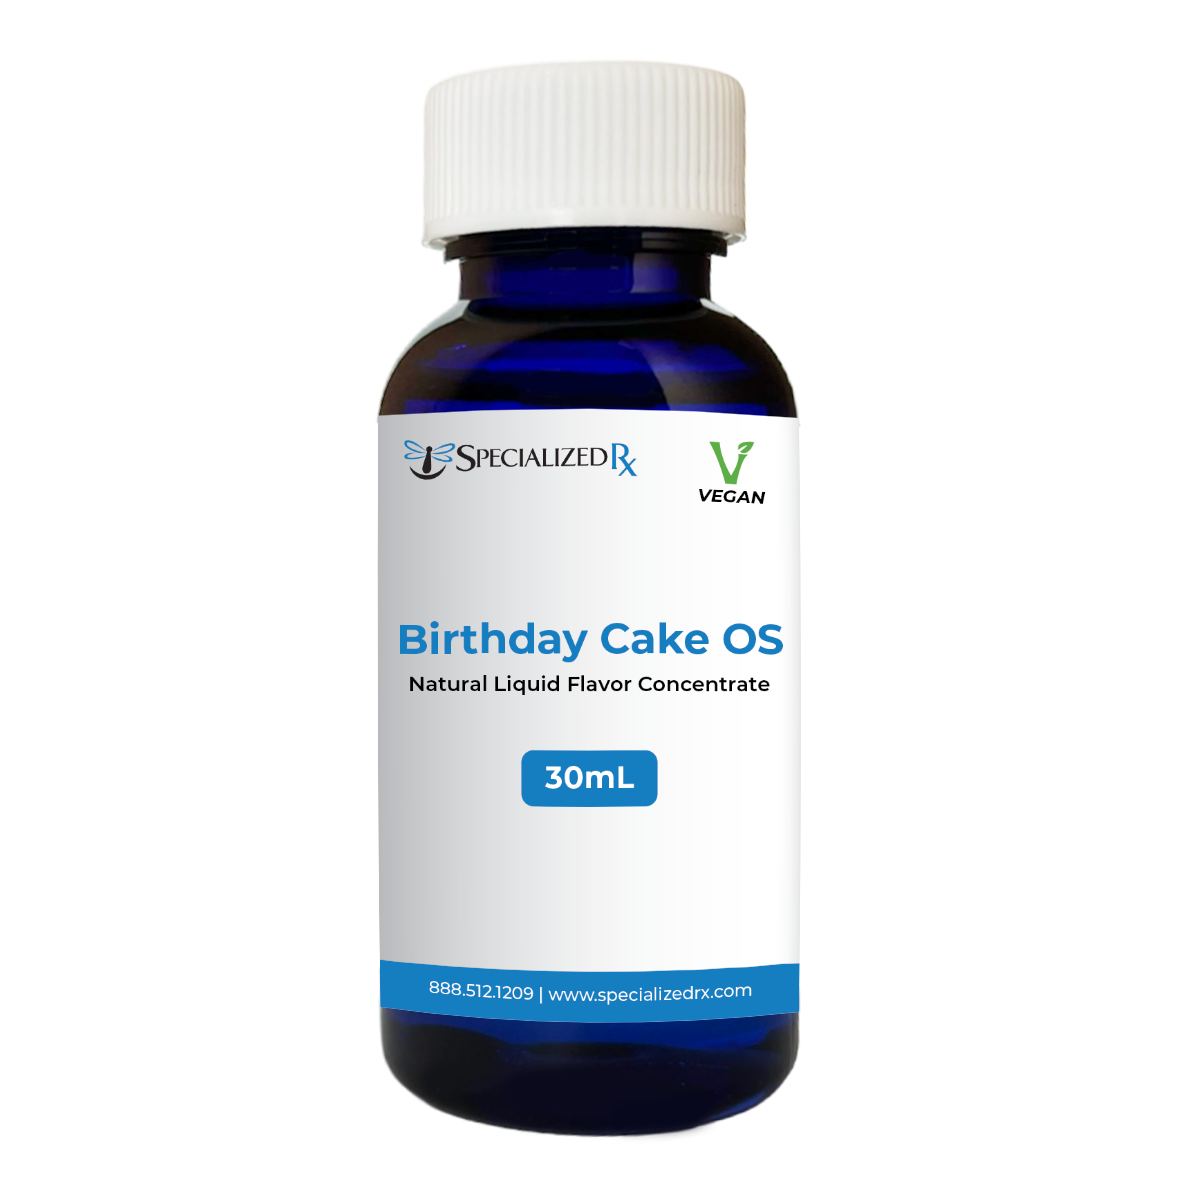 Birthday Cake OS Natural Liquid Flavor Concentrate